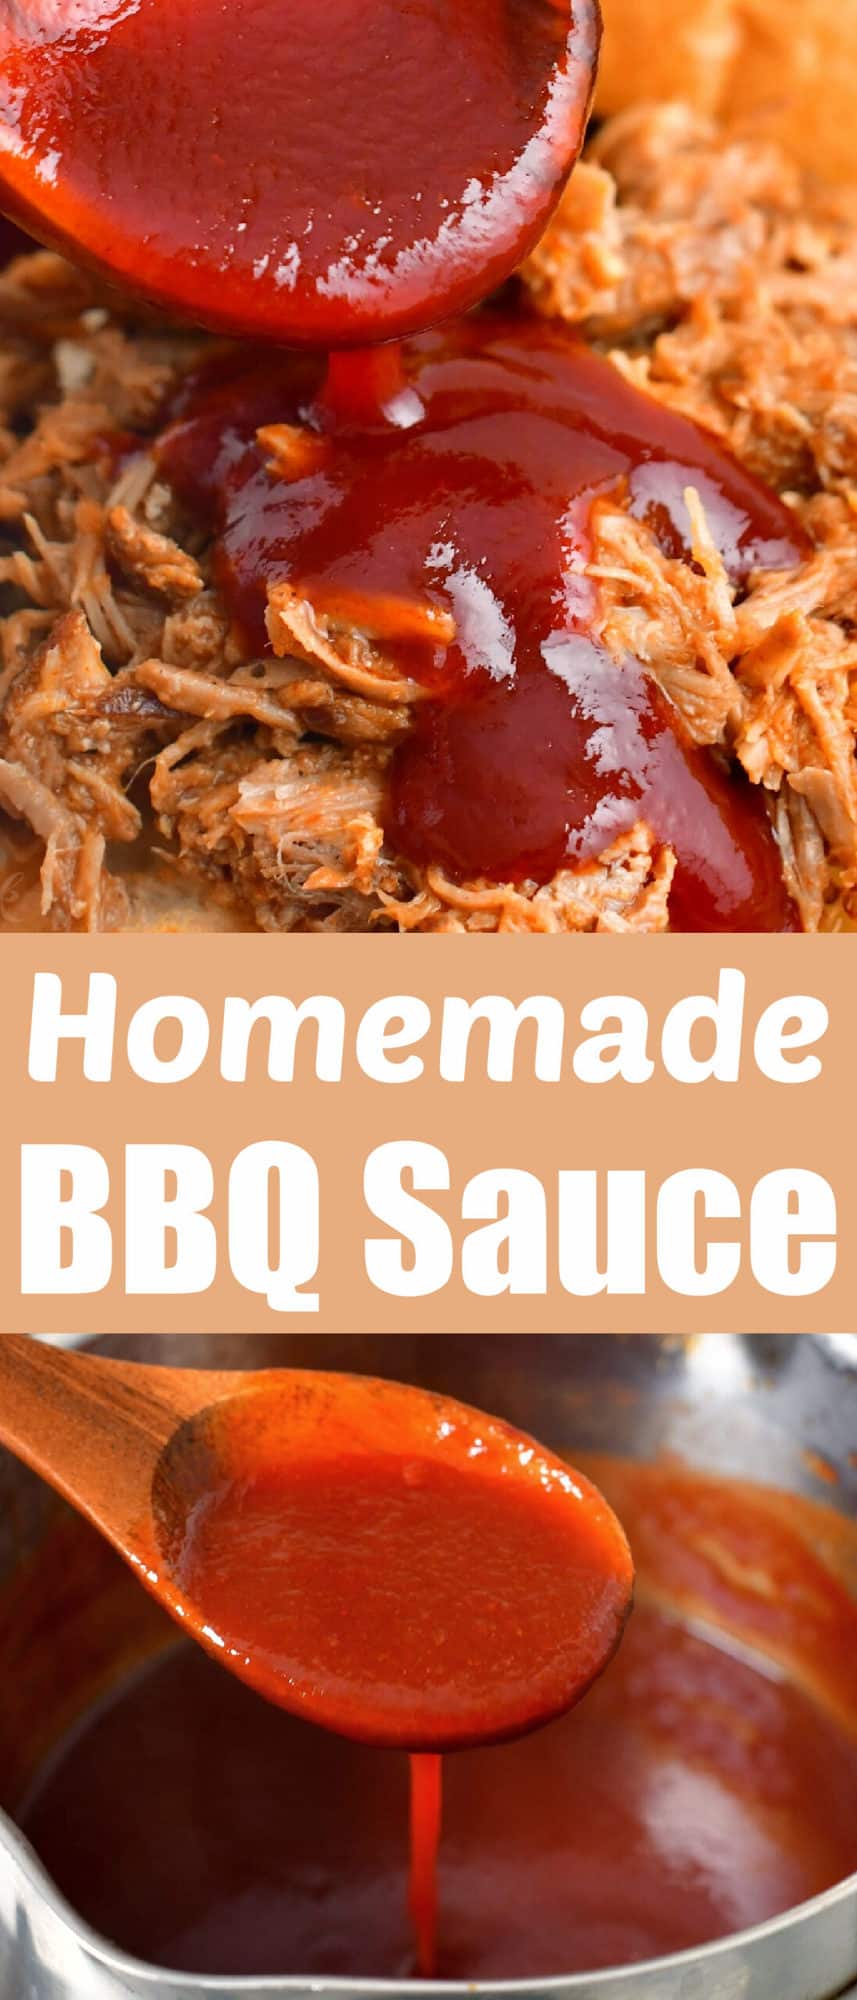 title collage of two images and title of recipe of sauce on pulled pork and sauce on spoon